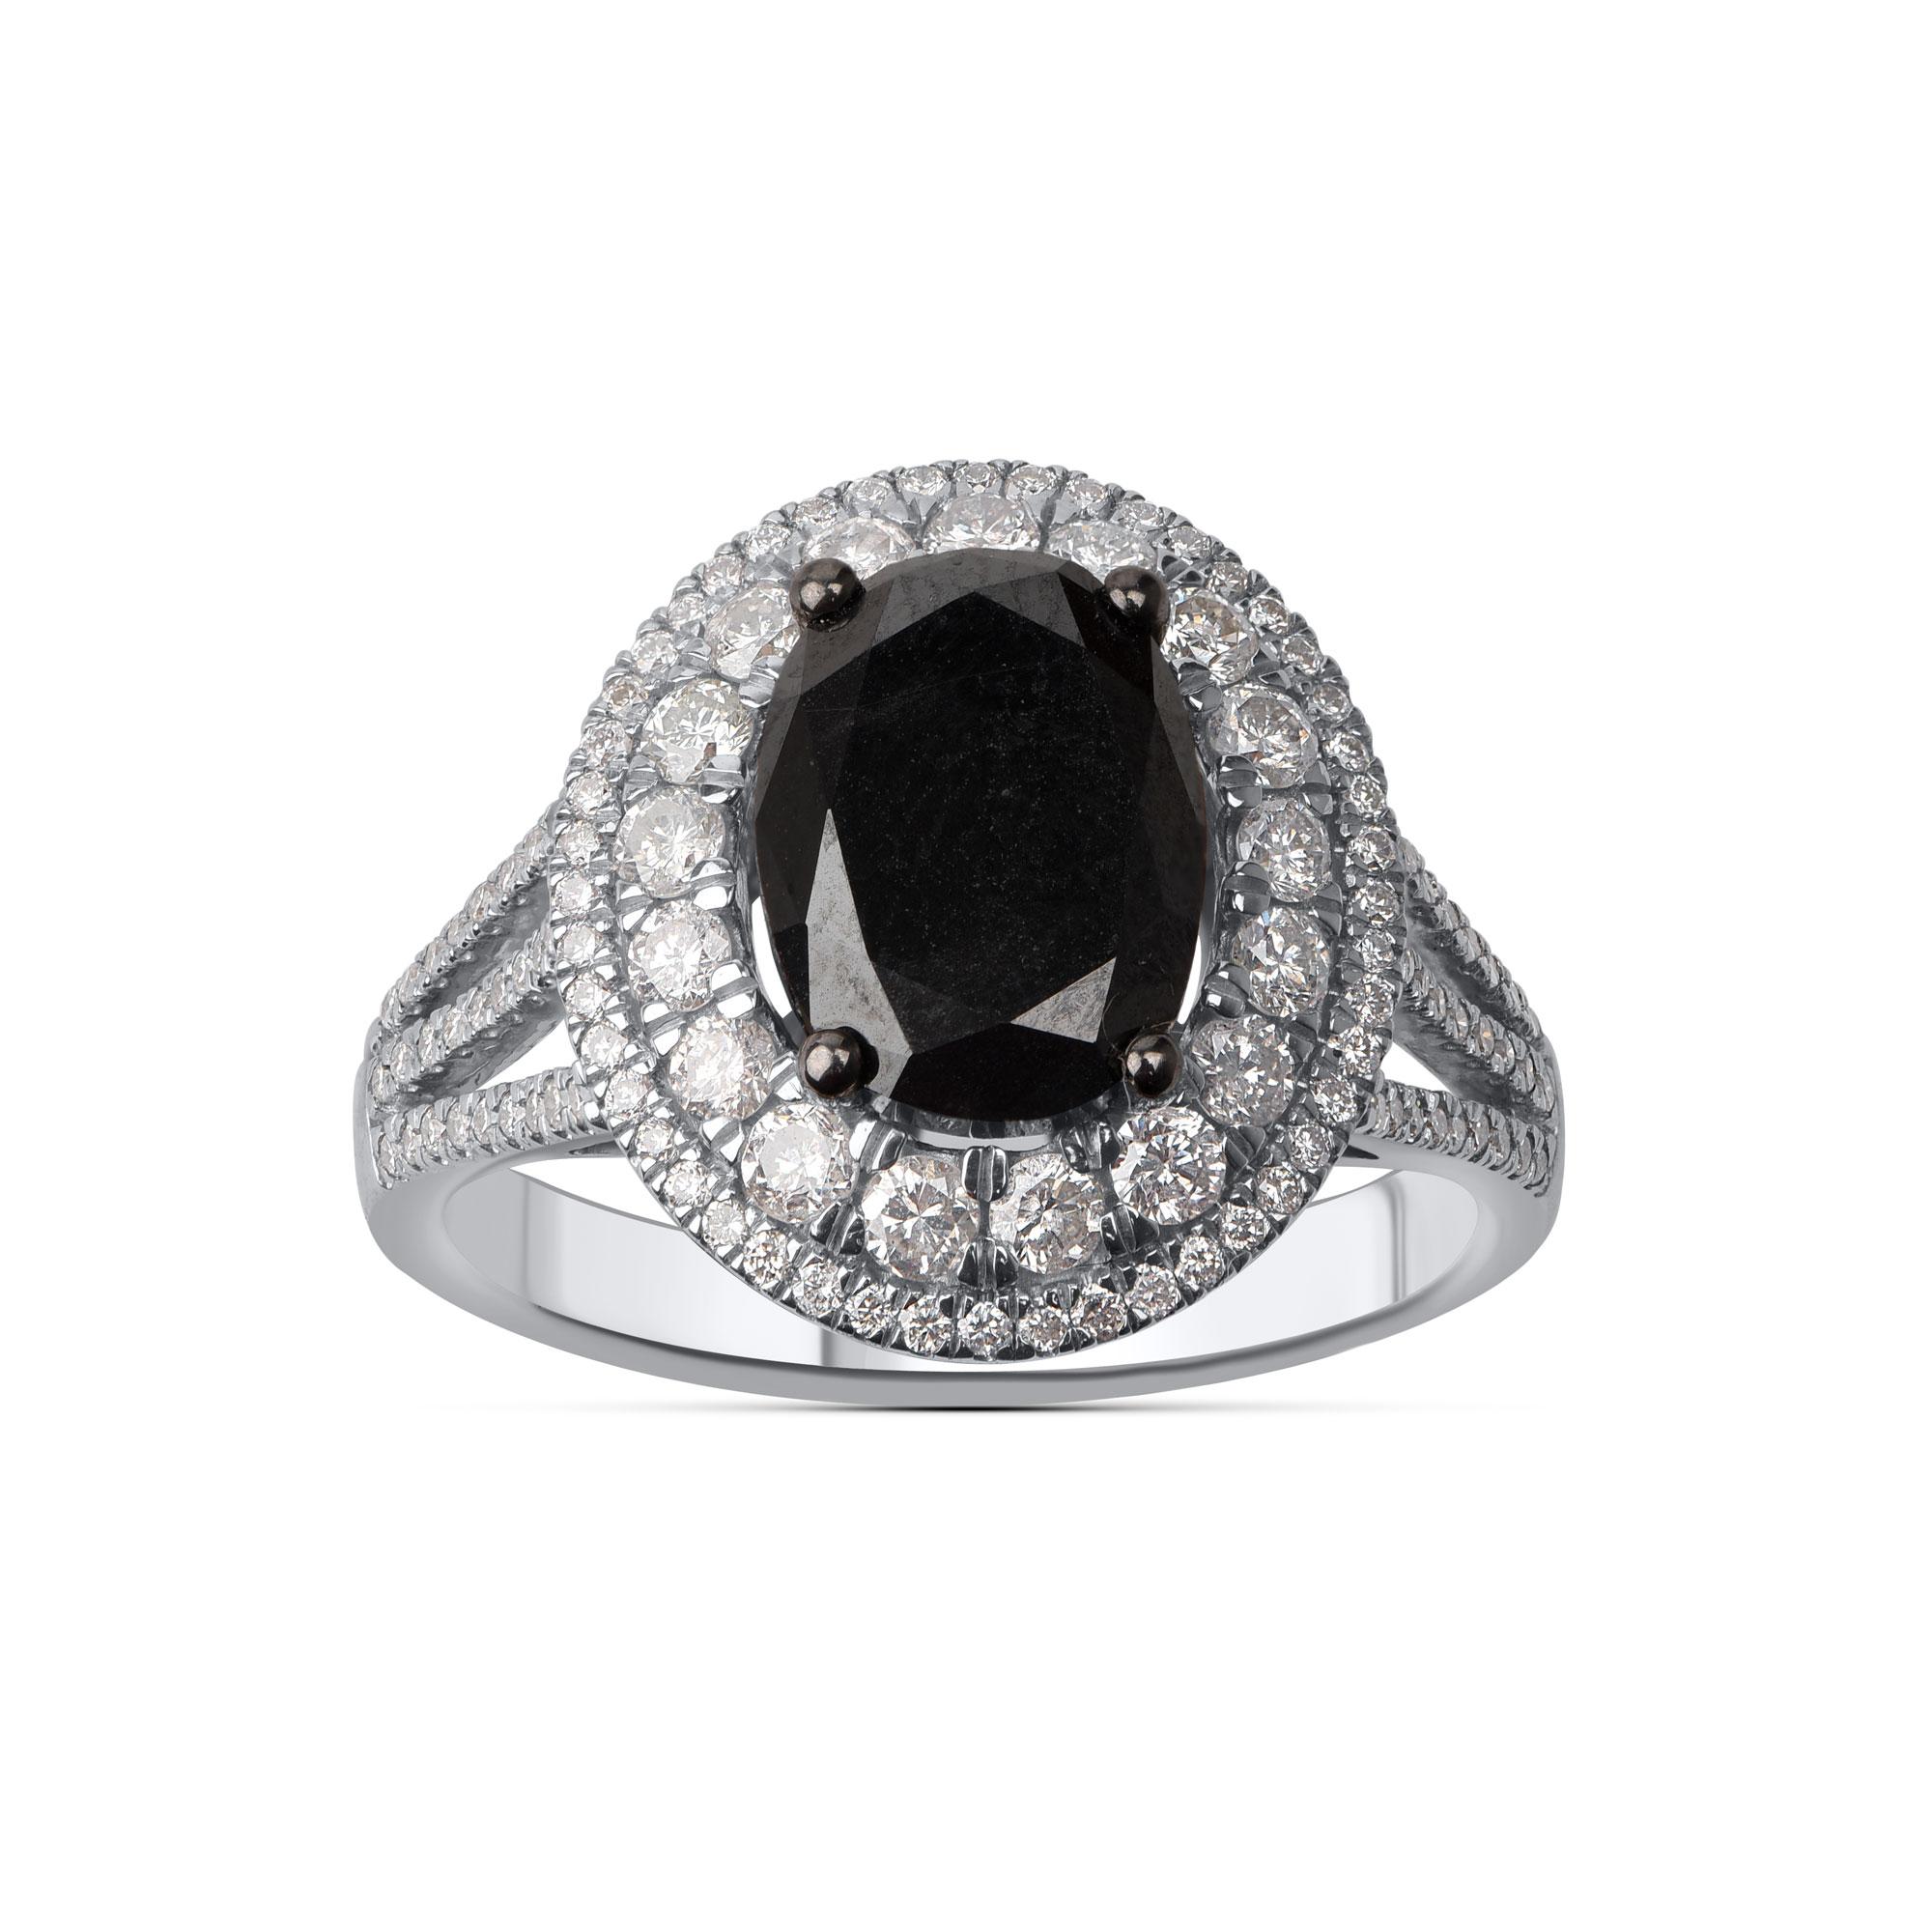 Elegantly designed by our skillful artisans in 14 KT white gold and studded with 119 brilliant and 1 black diamond in prong setting. Diamonds are graded  HI color, I2 clarity. An updated take on a classic, this sparkling diamond engagement ring is